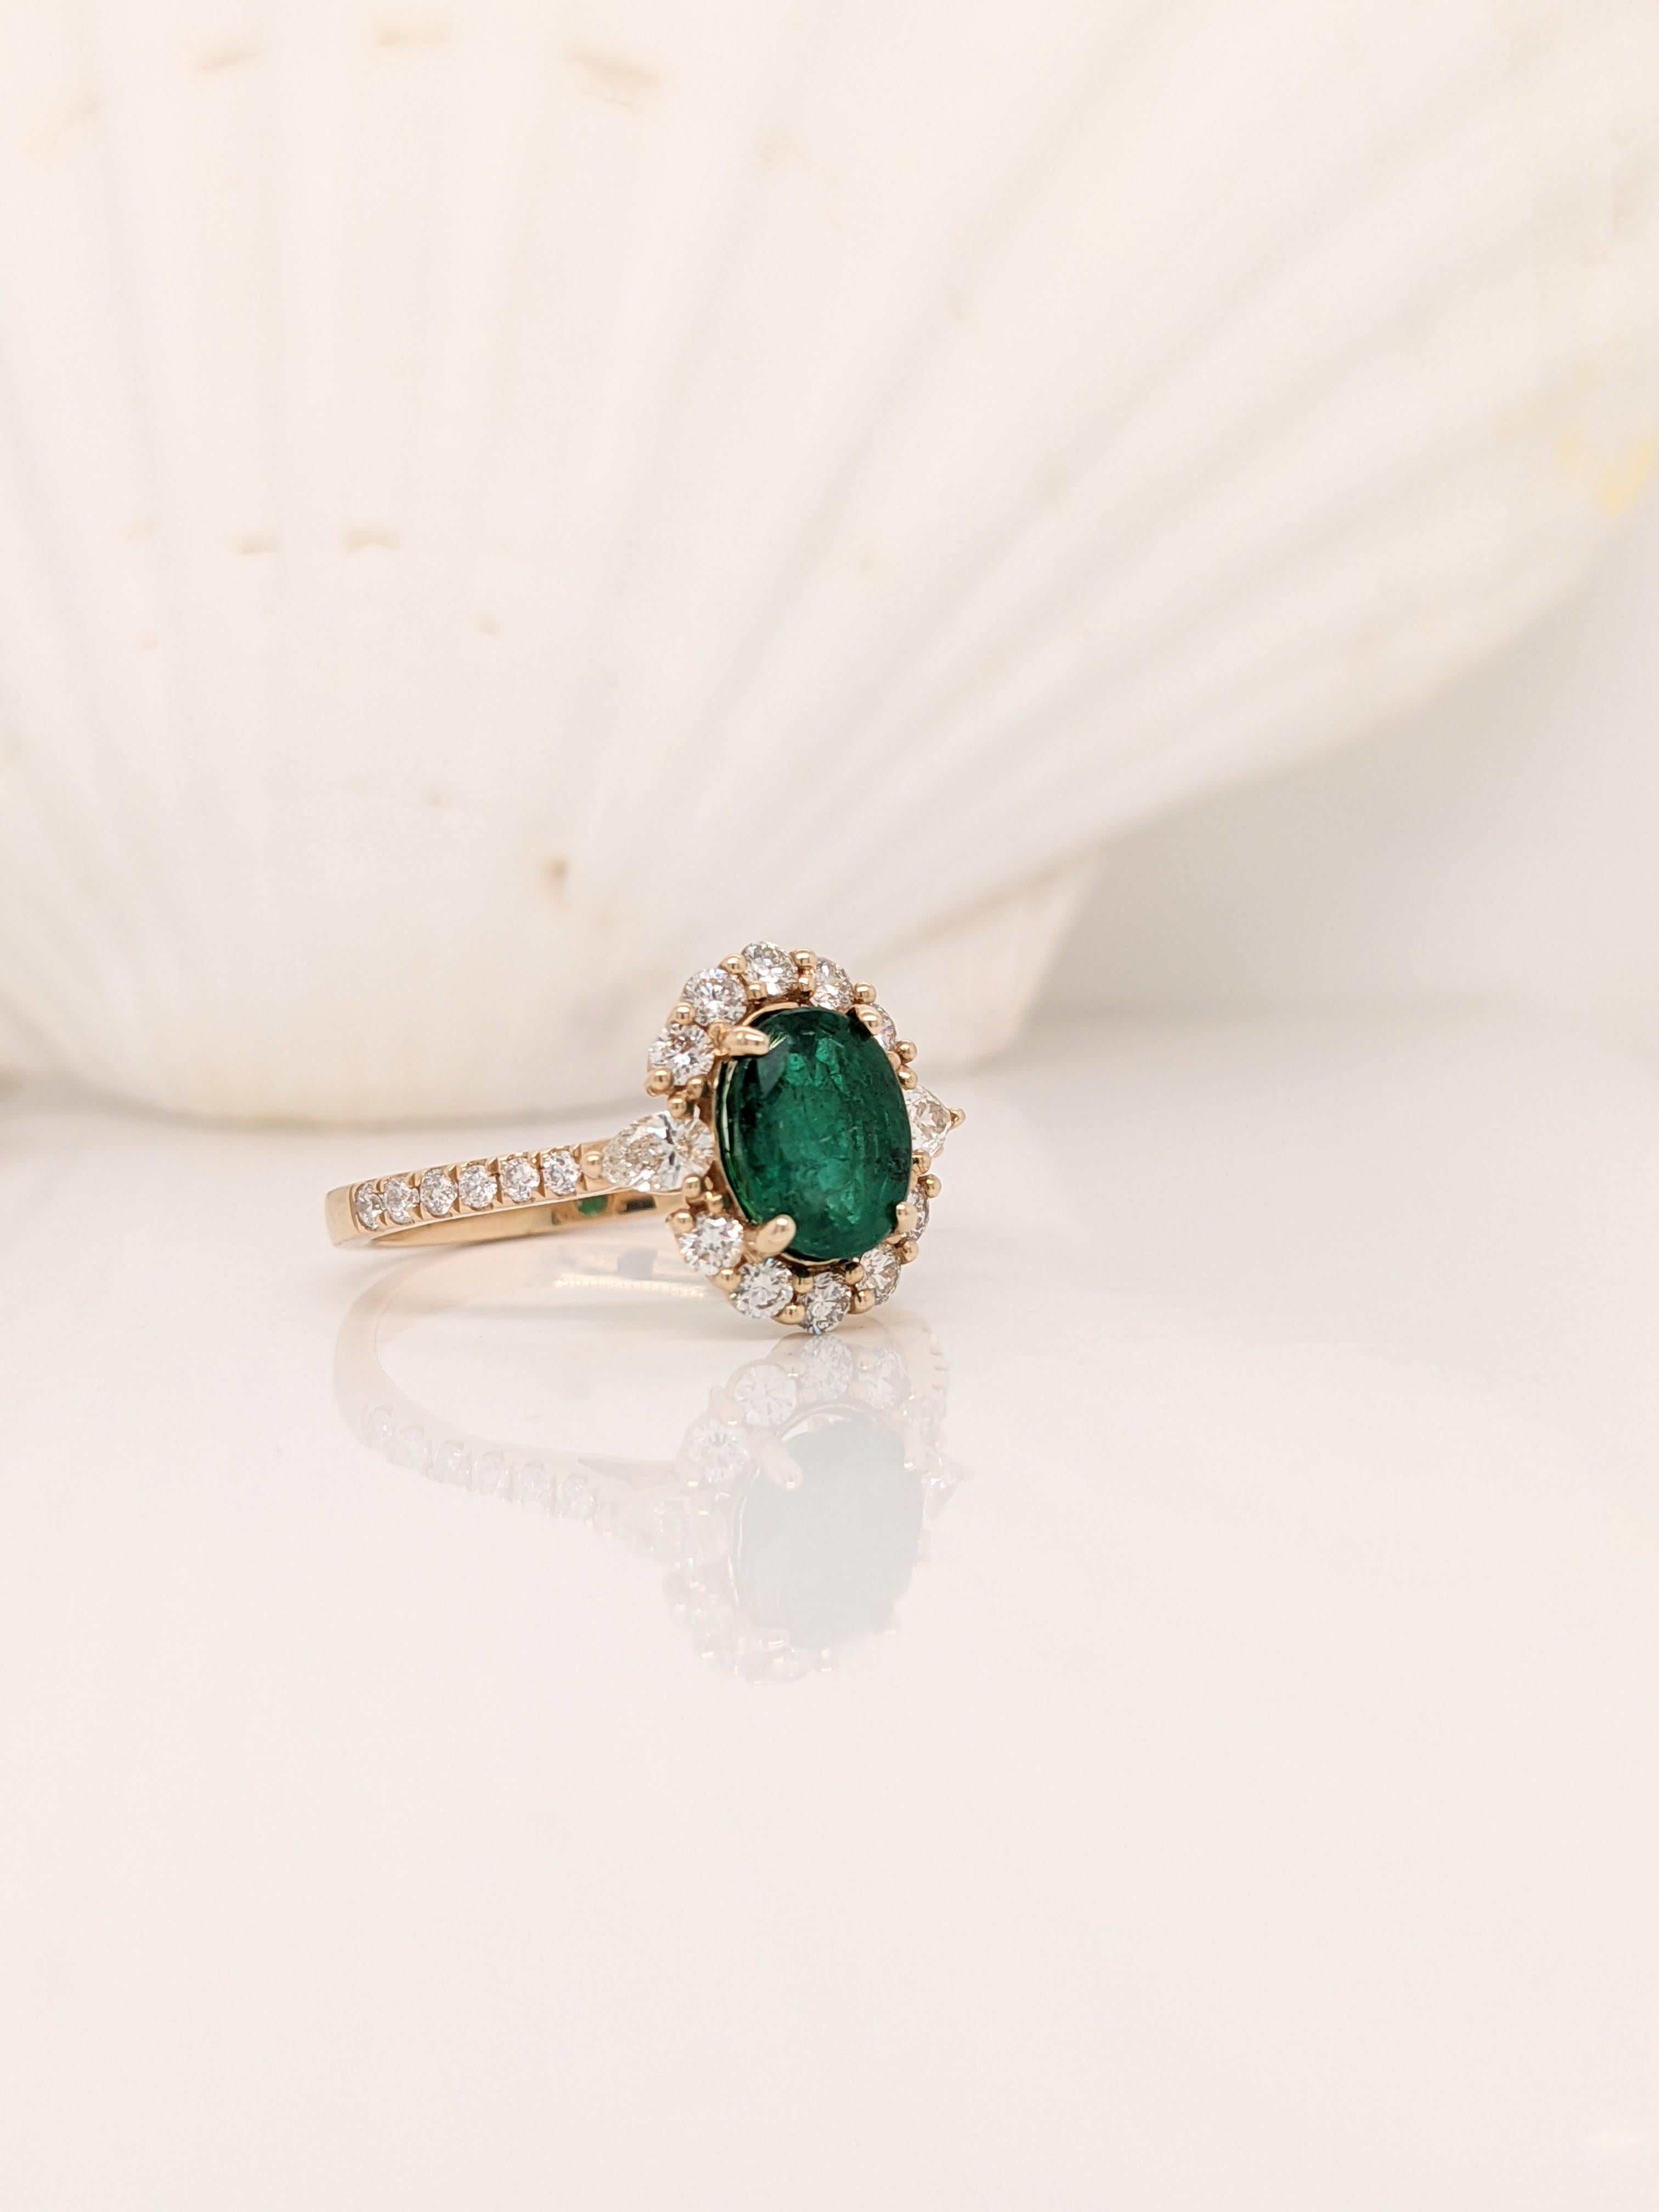 Green emerald in 14k Yellow Gold with natural earth-mined round and pear Diamond accents. This ring has a pronged basket and a diamond studded shank. A beautiful ring design perfect for an eye catching engagement or anniversary. This ring also makes